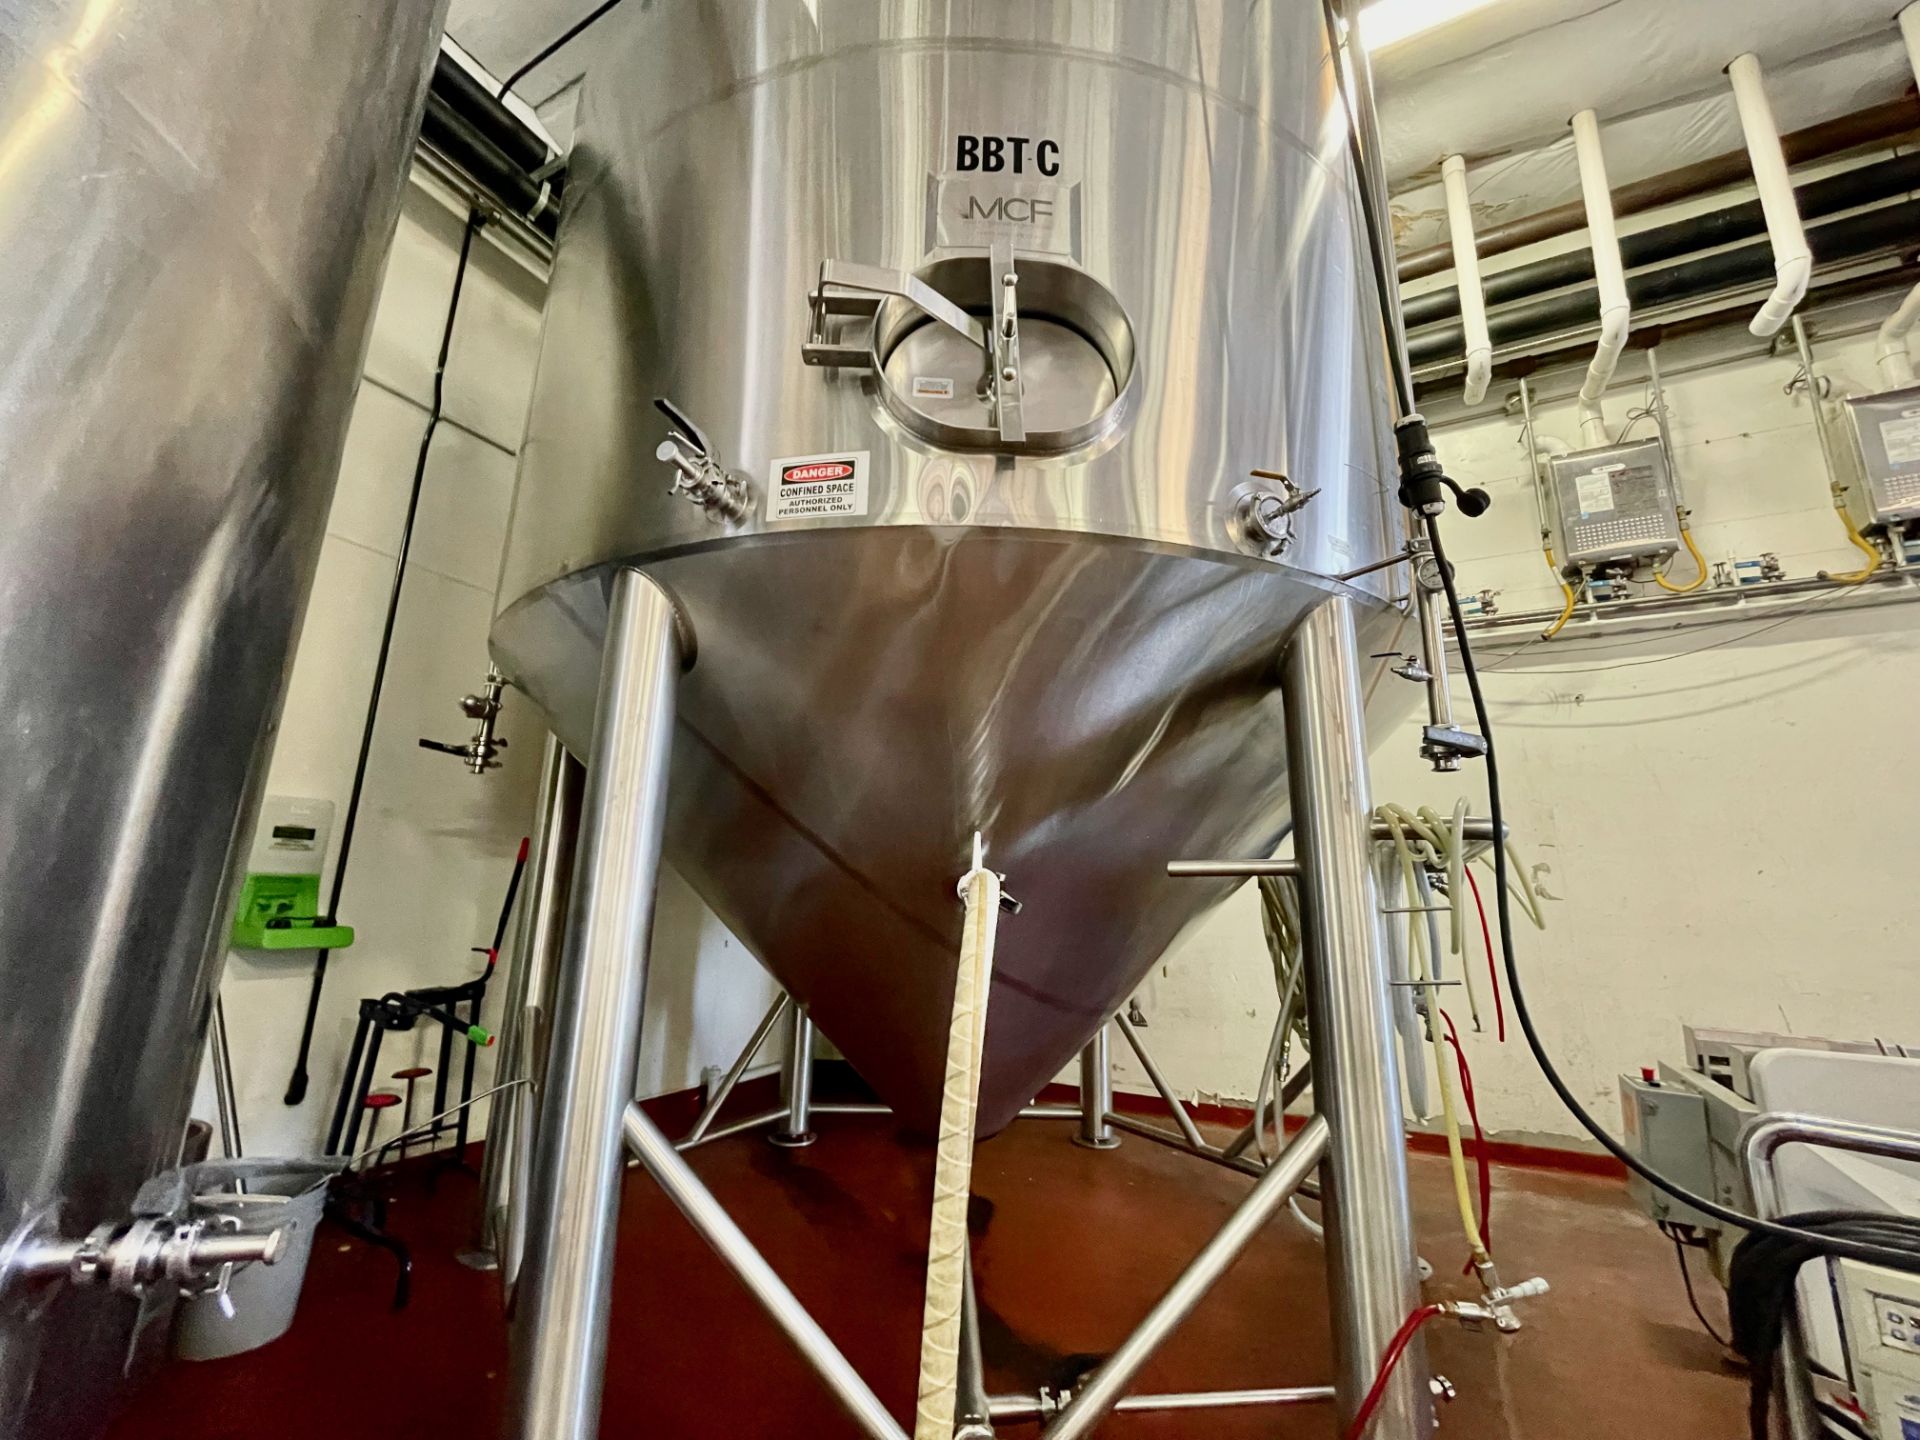 2016 Metalcraft 170 BBL Fermenter, Glycol Jacketed, Steep Cone Bottom, D | Rig Fee: $6350 w/ Saddles - Image 6 of 8